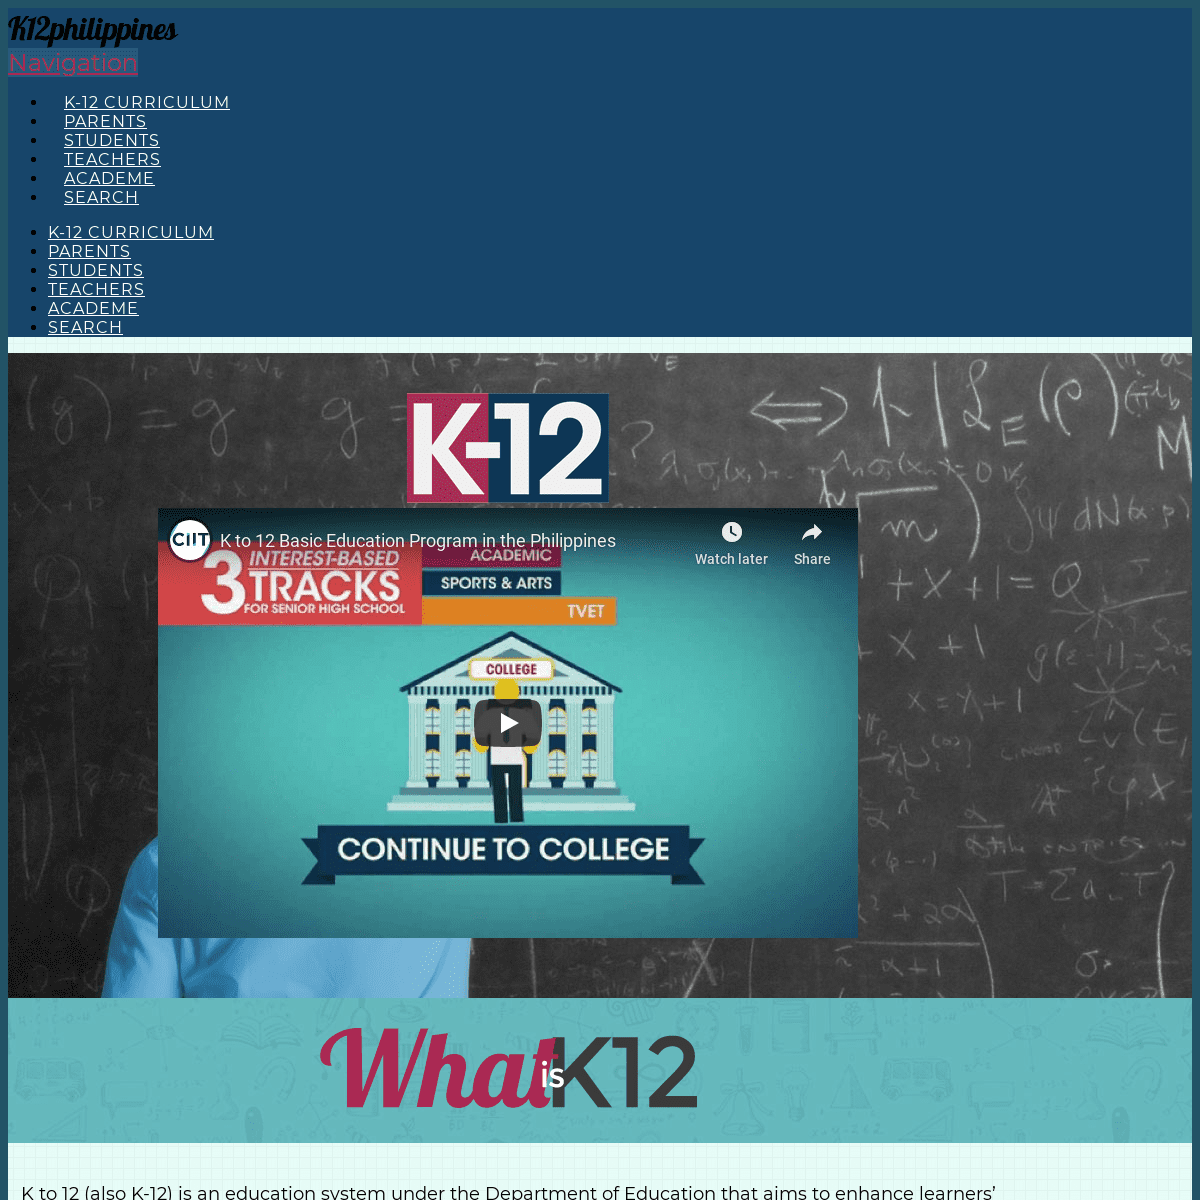 A complete backup of k12philippines.com